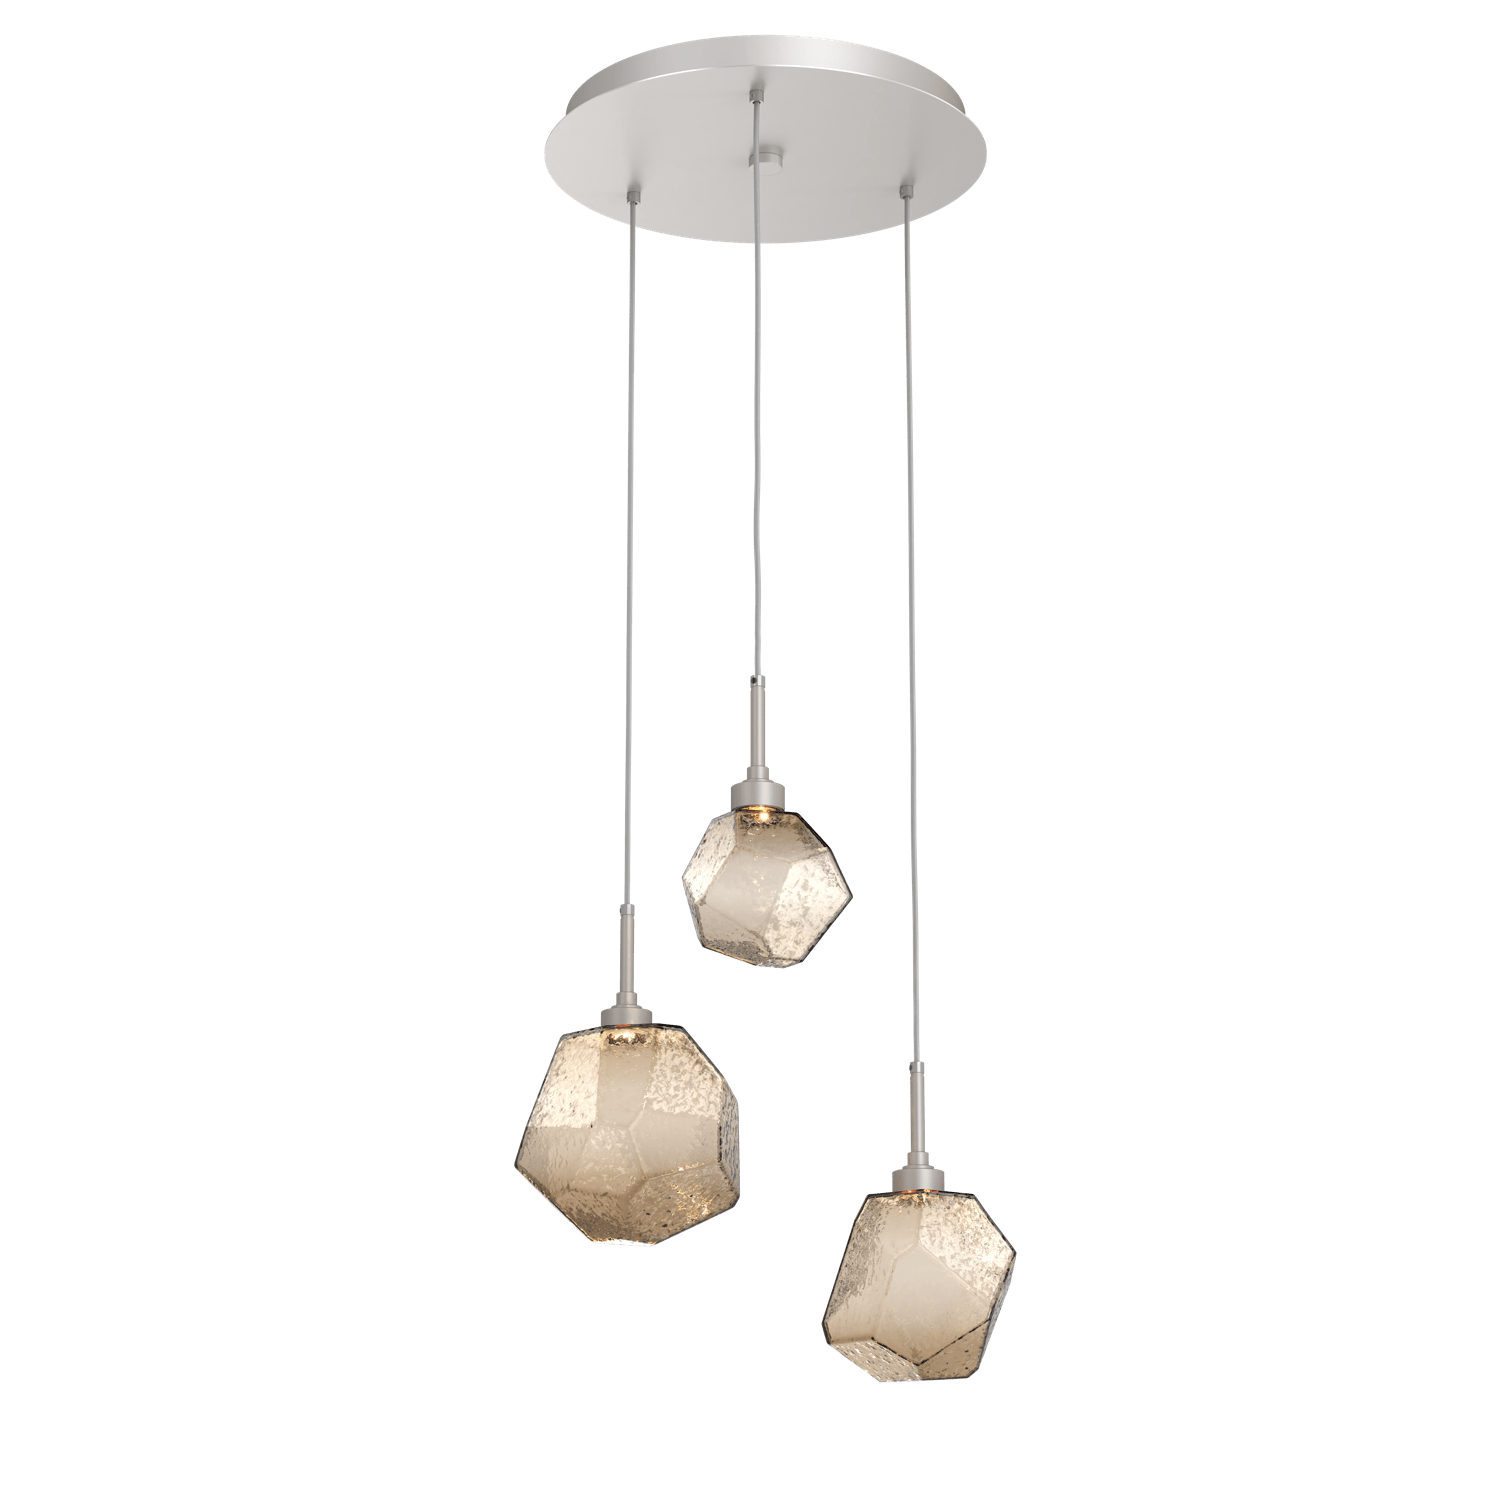 CHB0039-03-BS-B-Hammerton-Studio-Gem-3-light-round-pendant-chandelier-with-metallic-beige-silver-finish-and-bronze-blown-glass-shades-and-LED-lamping